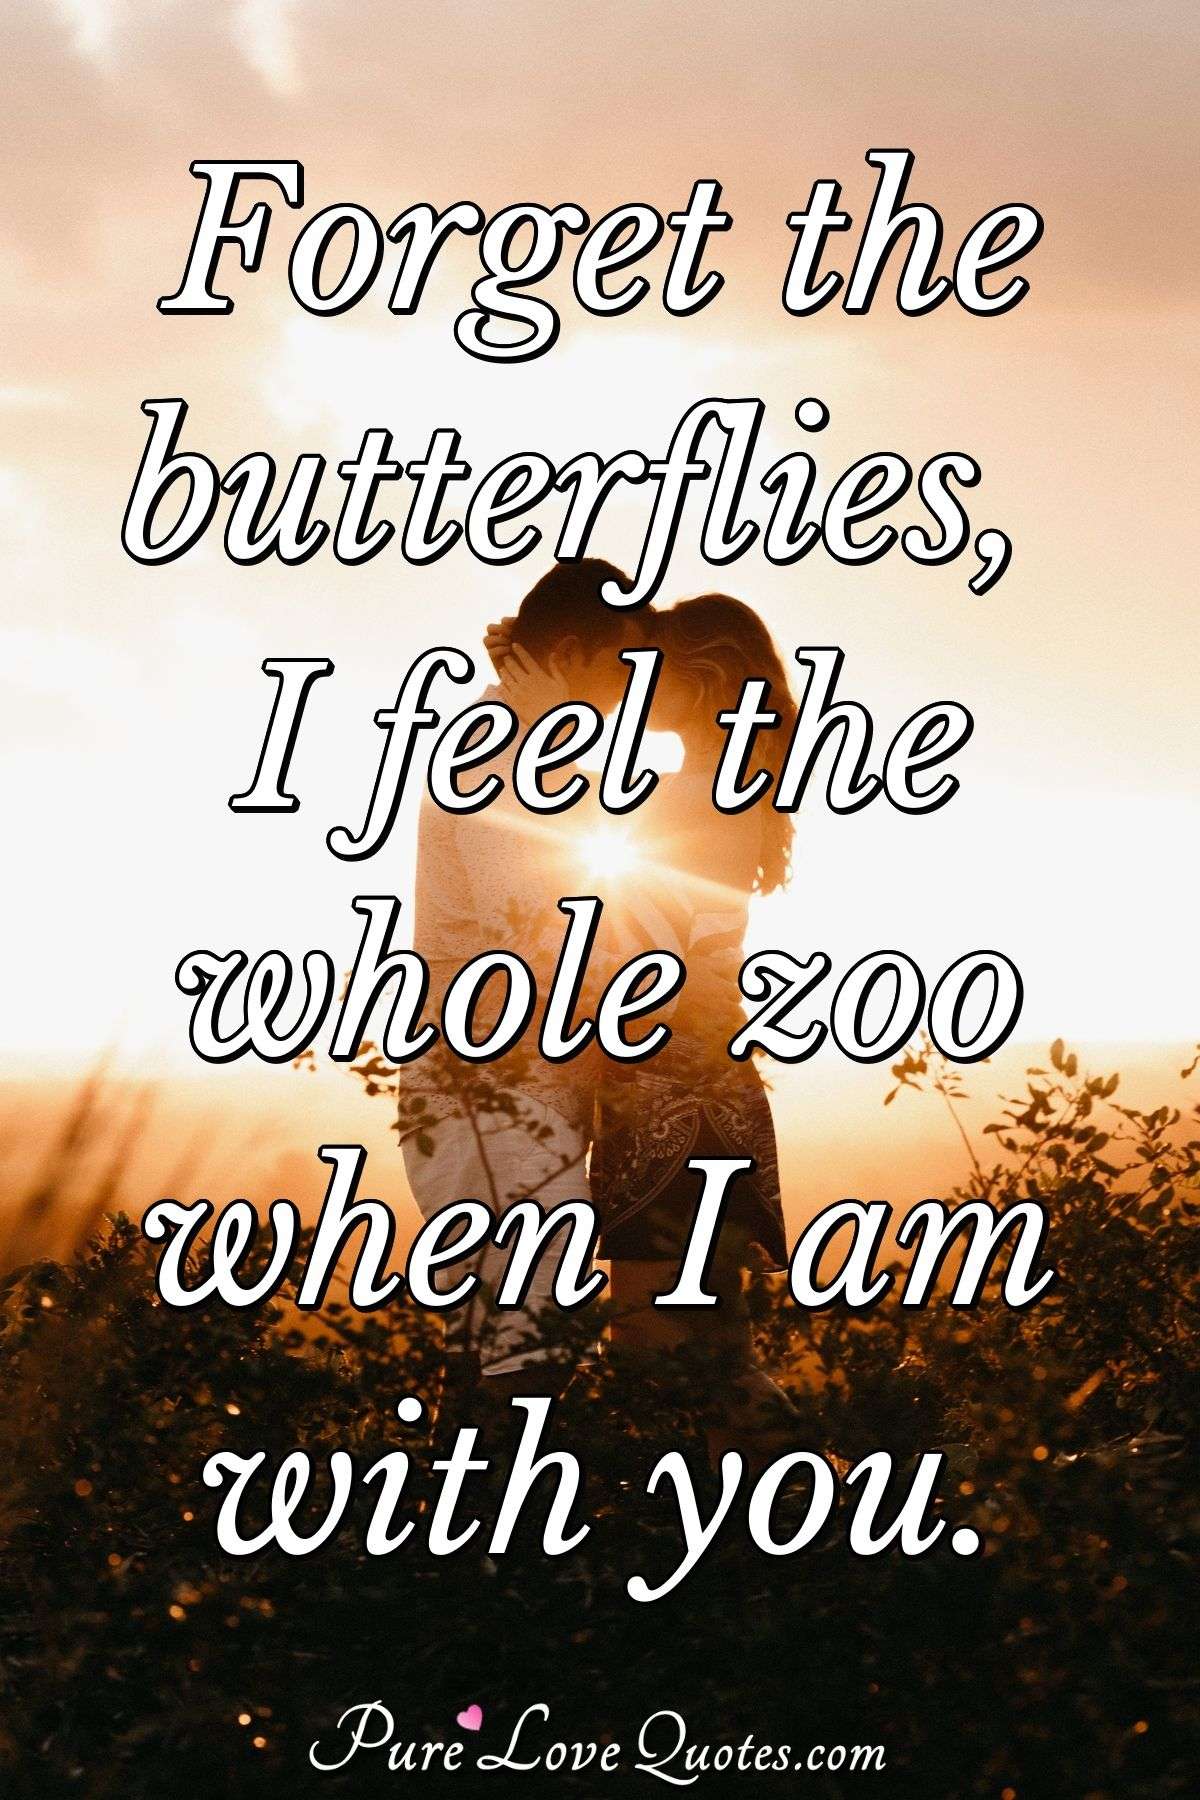 Forget the butterflies, I feel the whole zoo when I am with you. - Anonymous